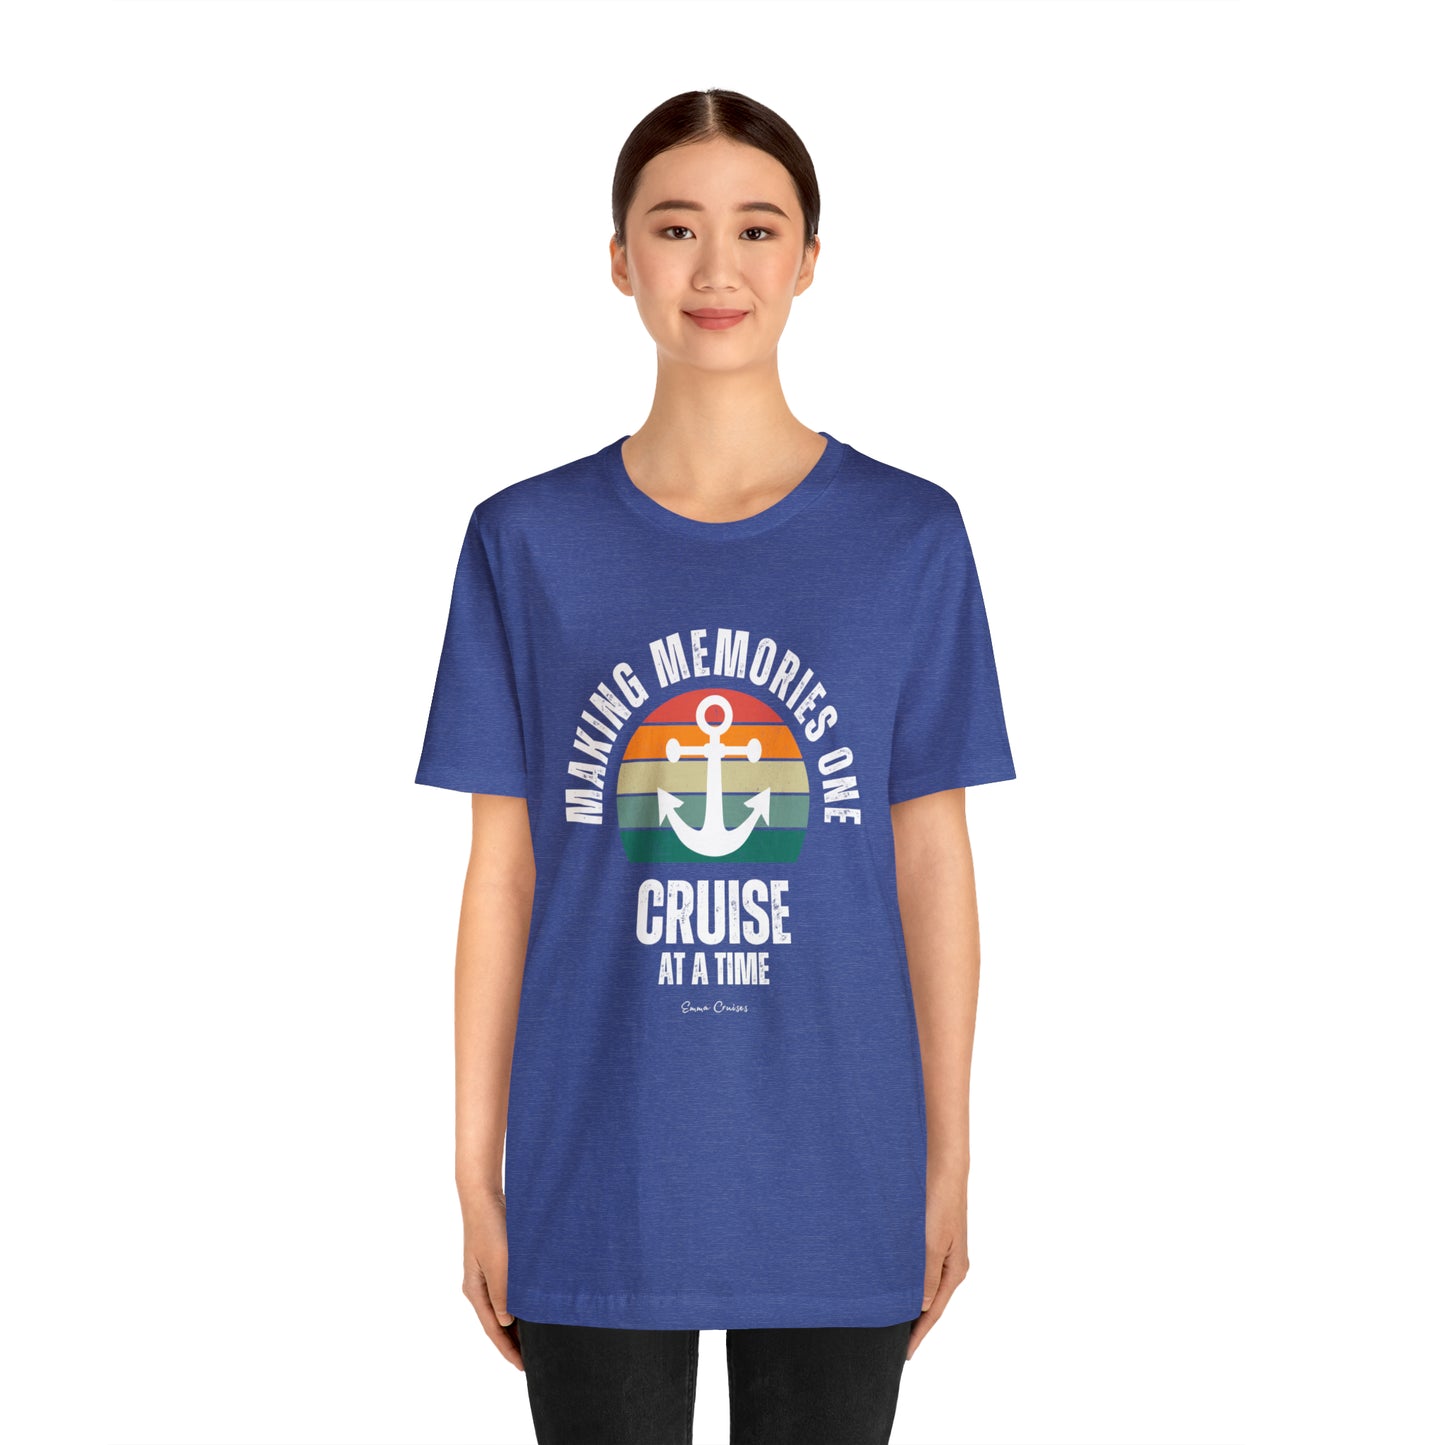 Making Memories One Cruise at a Time - UNISEX T-Shirt